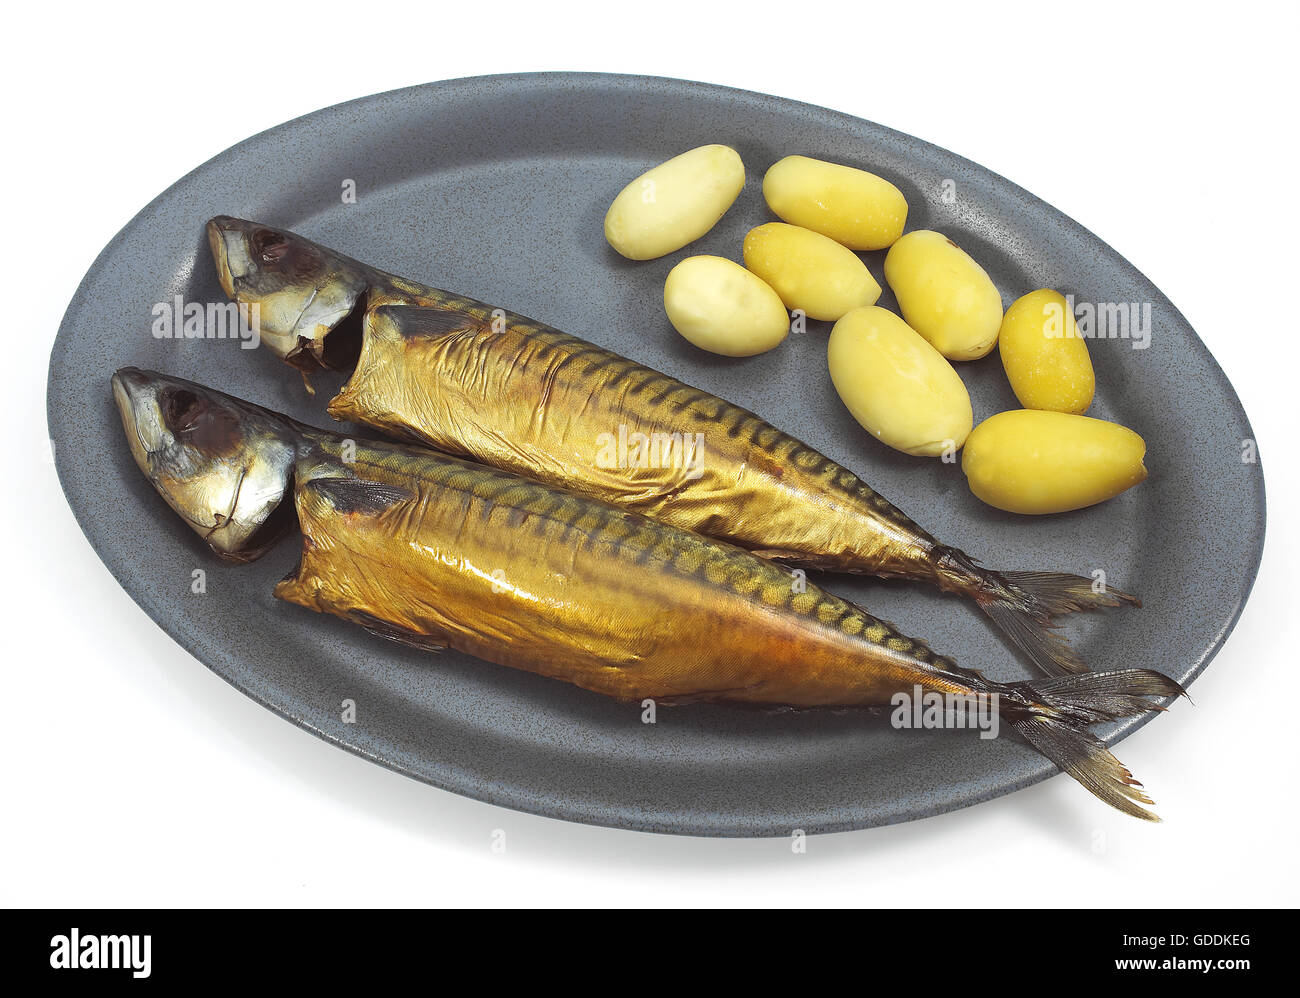 SMOKED MACKERL scomber scombrus WITH POTATOES ON A PLATE Stock Photo